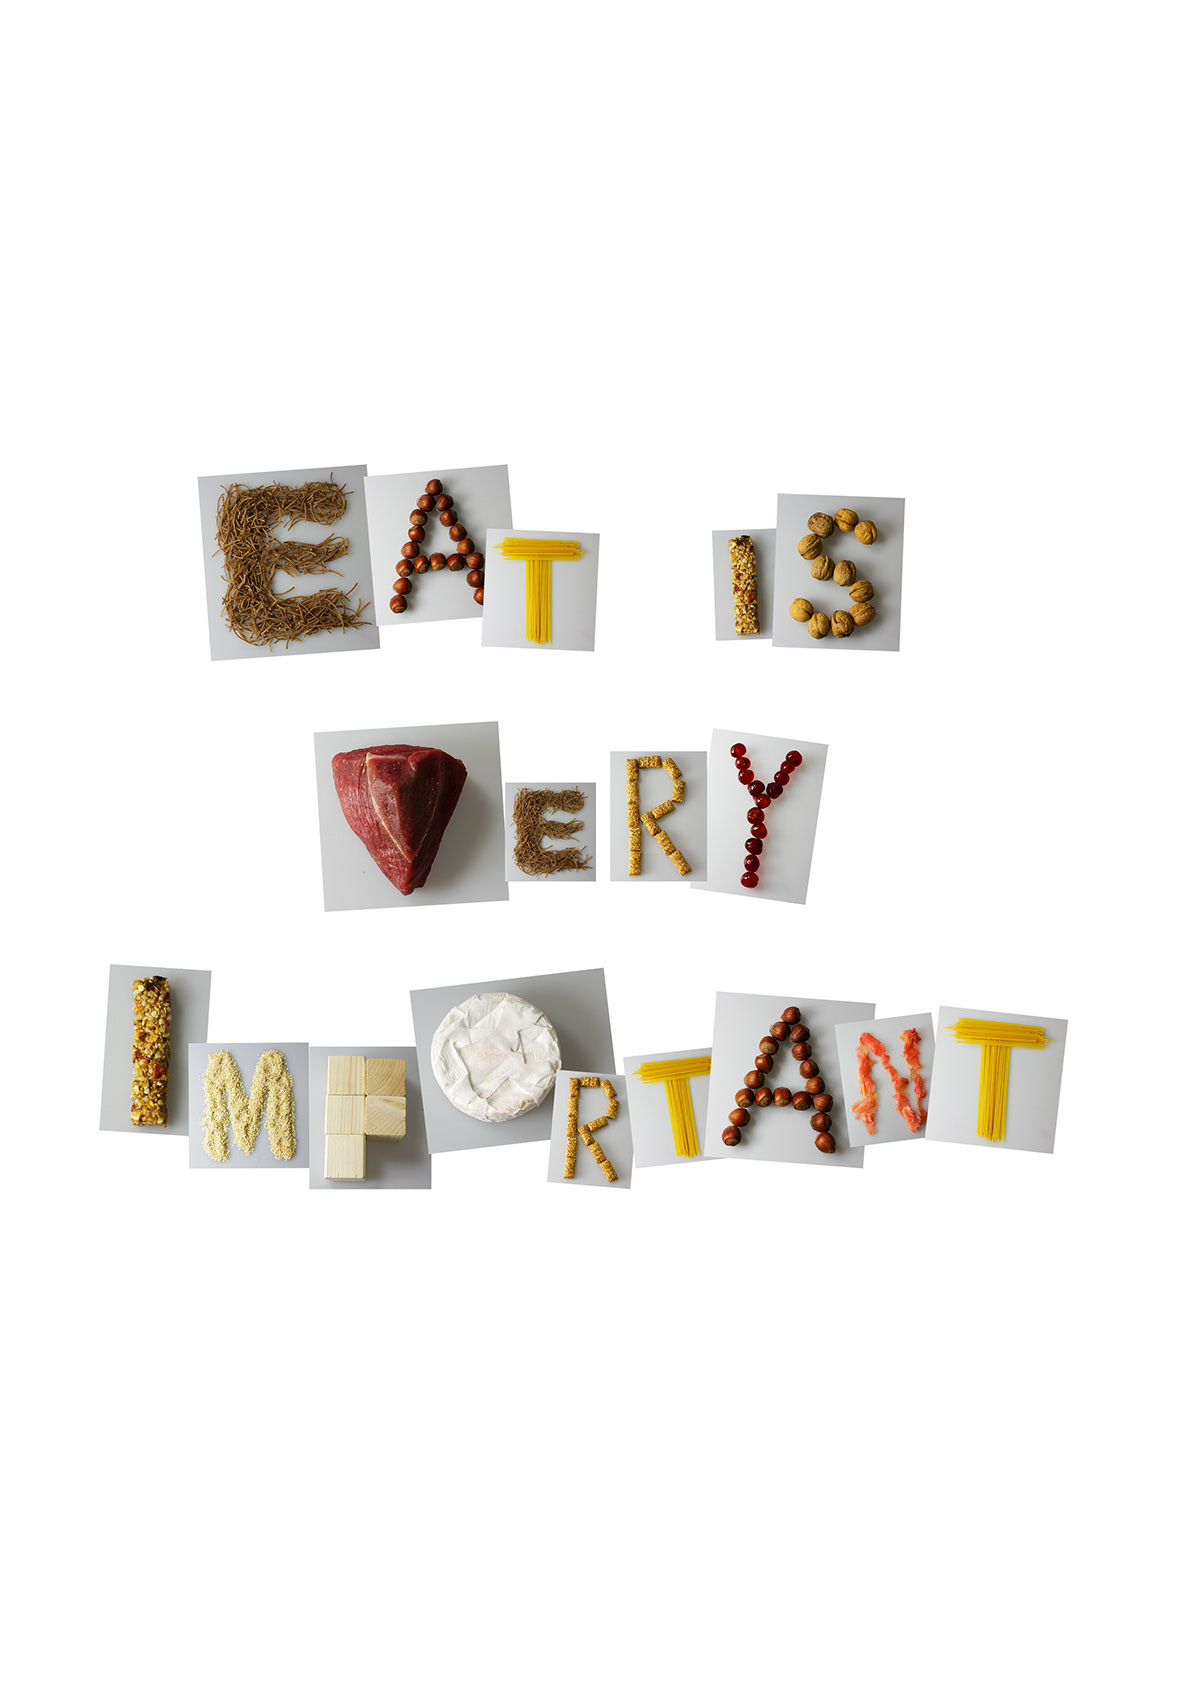 eco-food  healhty food ECO Product alphabet poster food photography letter poster  slogan poster